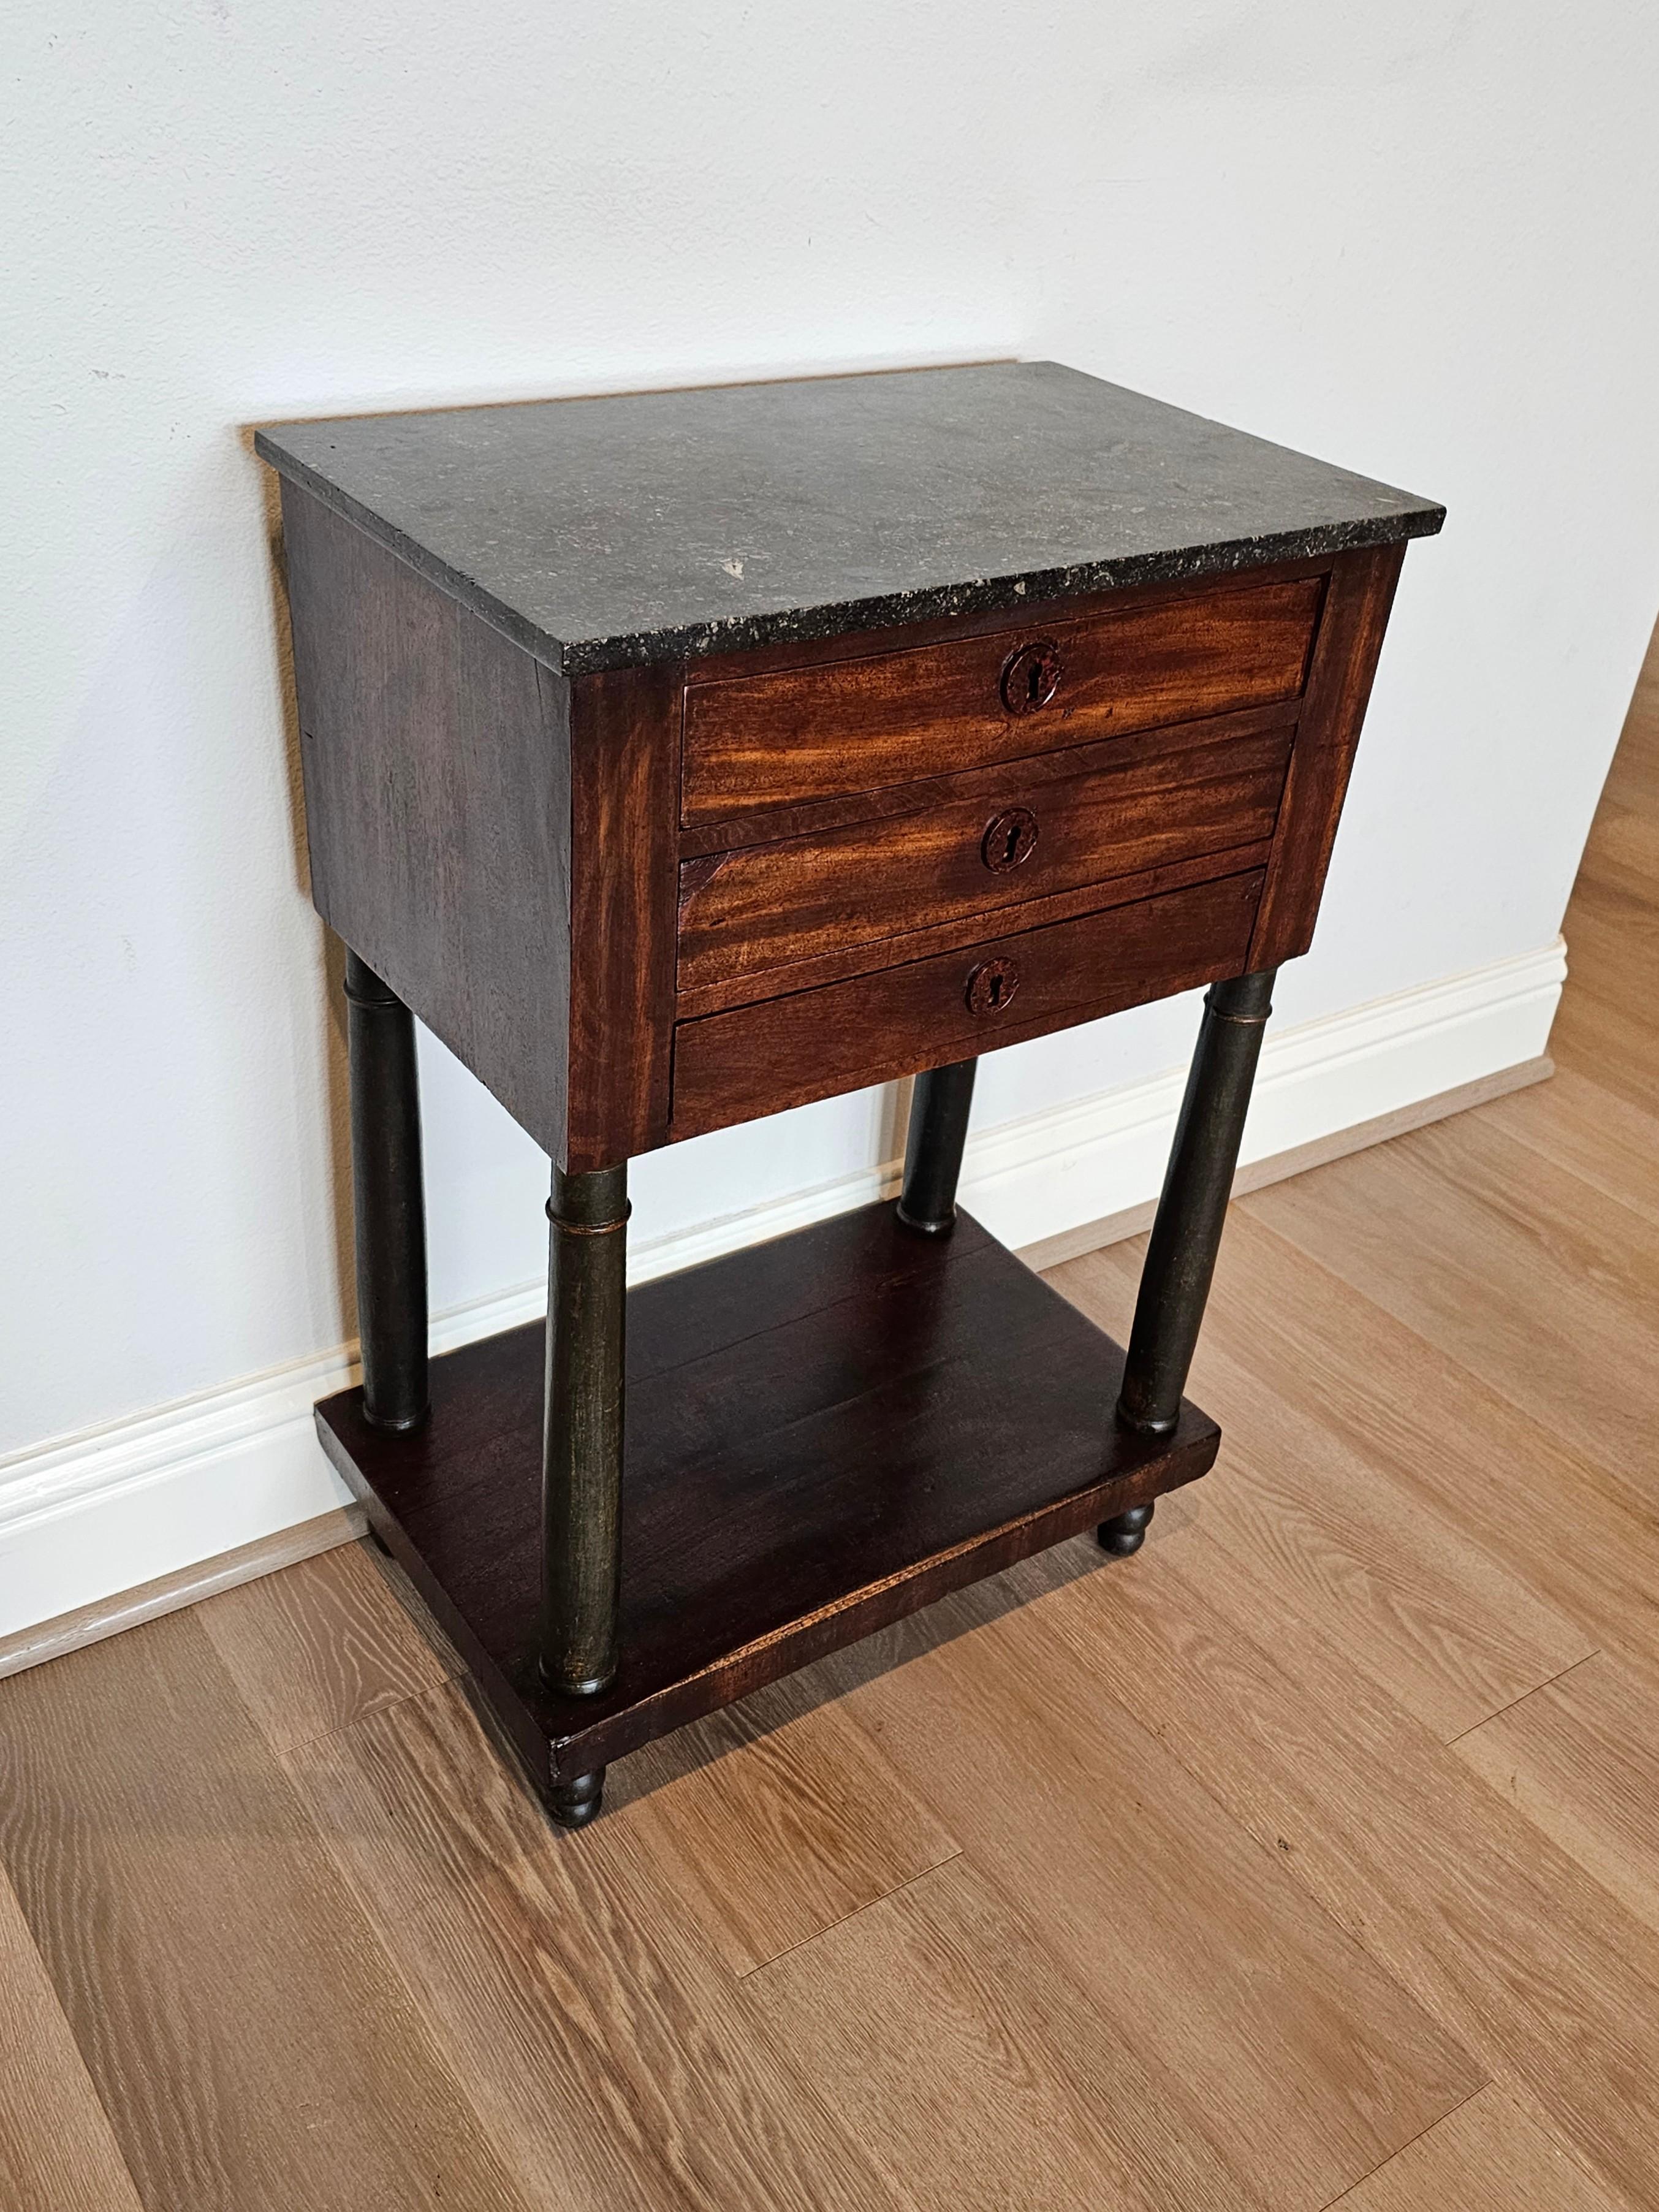 A period French Empire (1804-1815) mahogany chest of drawers nightstand with beautifully aged patina.

Born in France in the early 19th century, hand-crafted of warm rich solid mahogany with attractive grain detail, Napoleonic era Neoclassical Louis